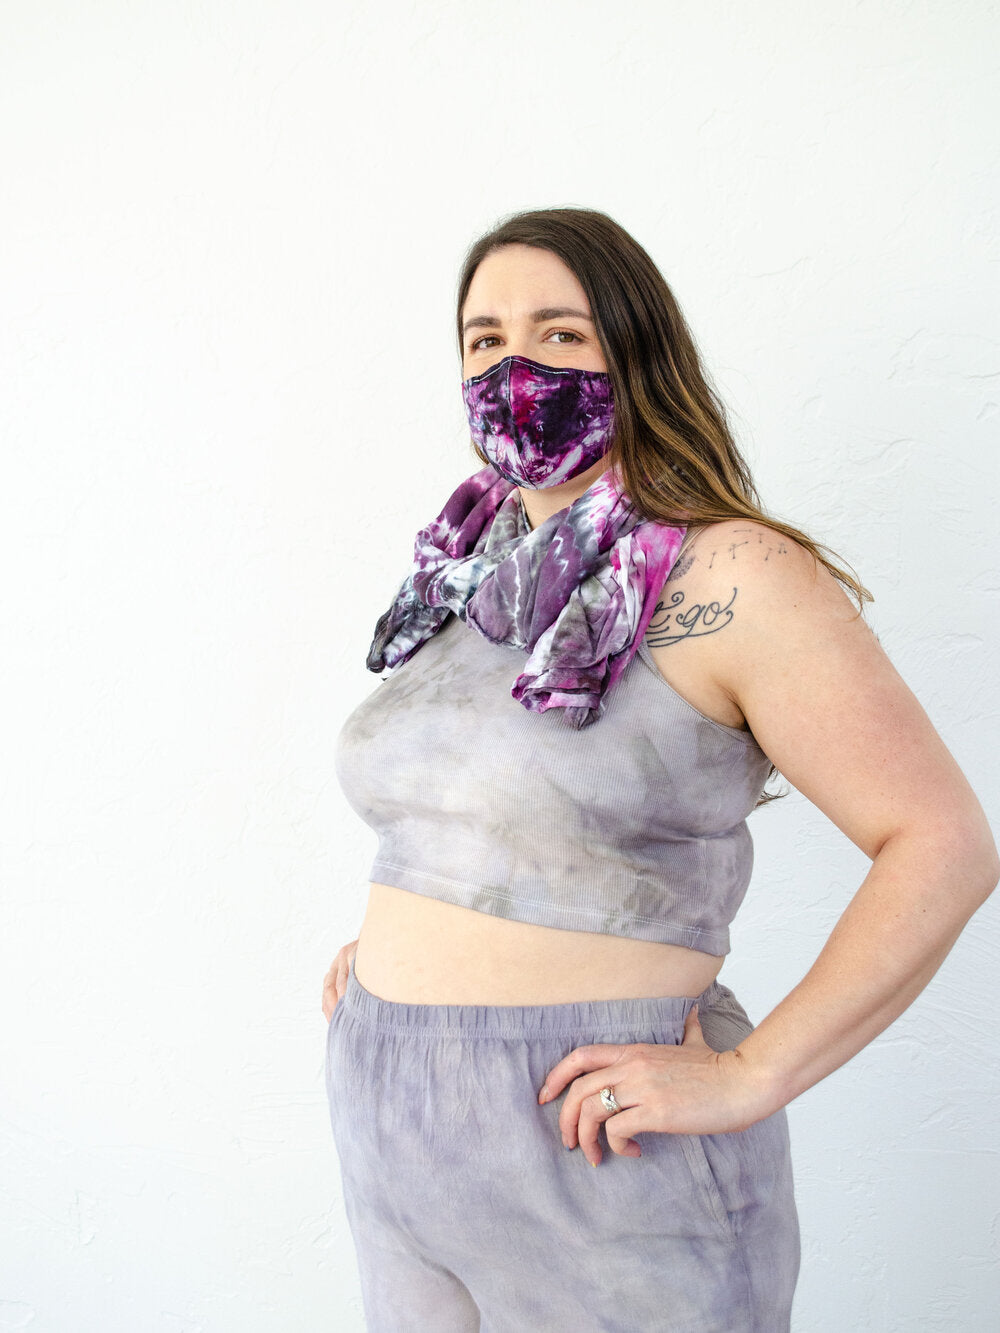 The Butterfly Wrap Number 1 - Tie Dye Sustainable Rayon Wrap by 1 Life